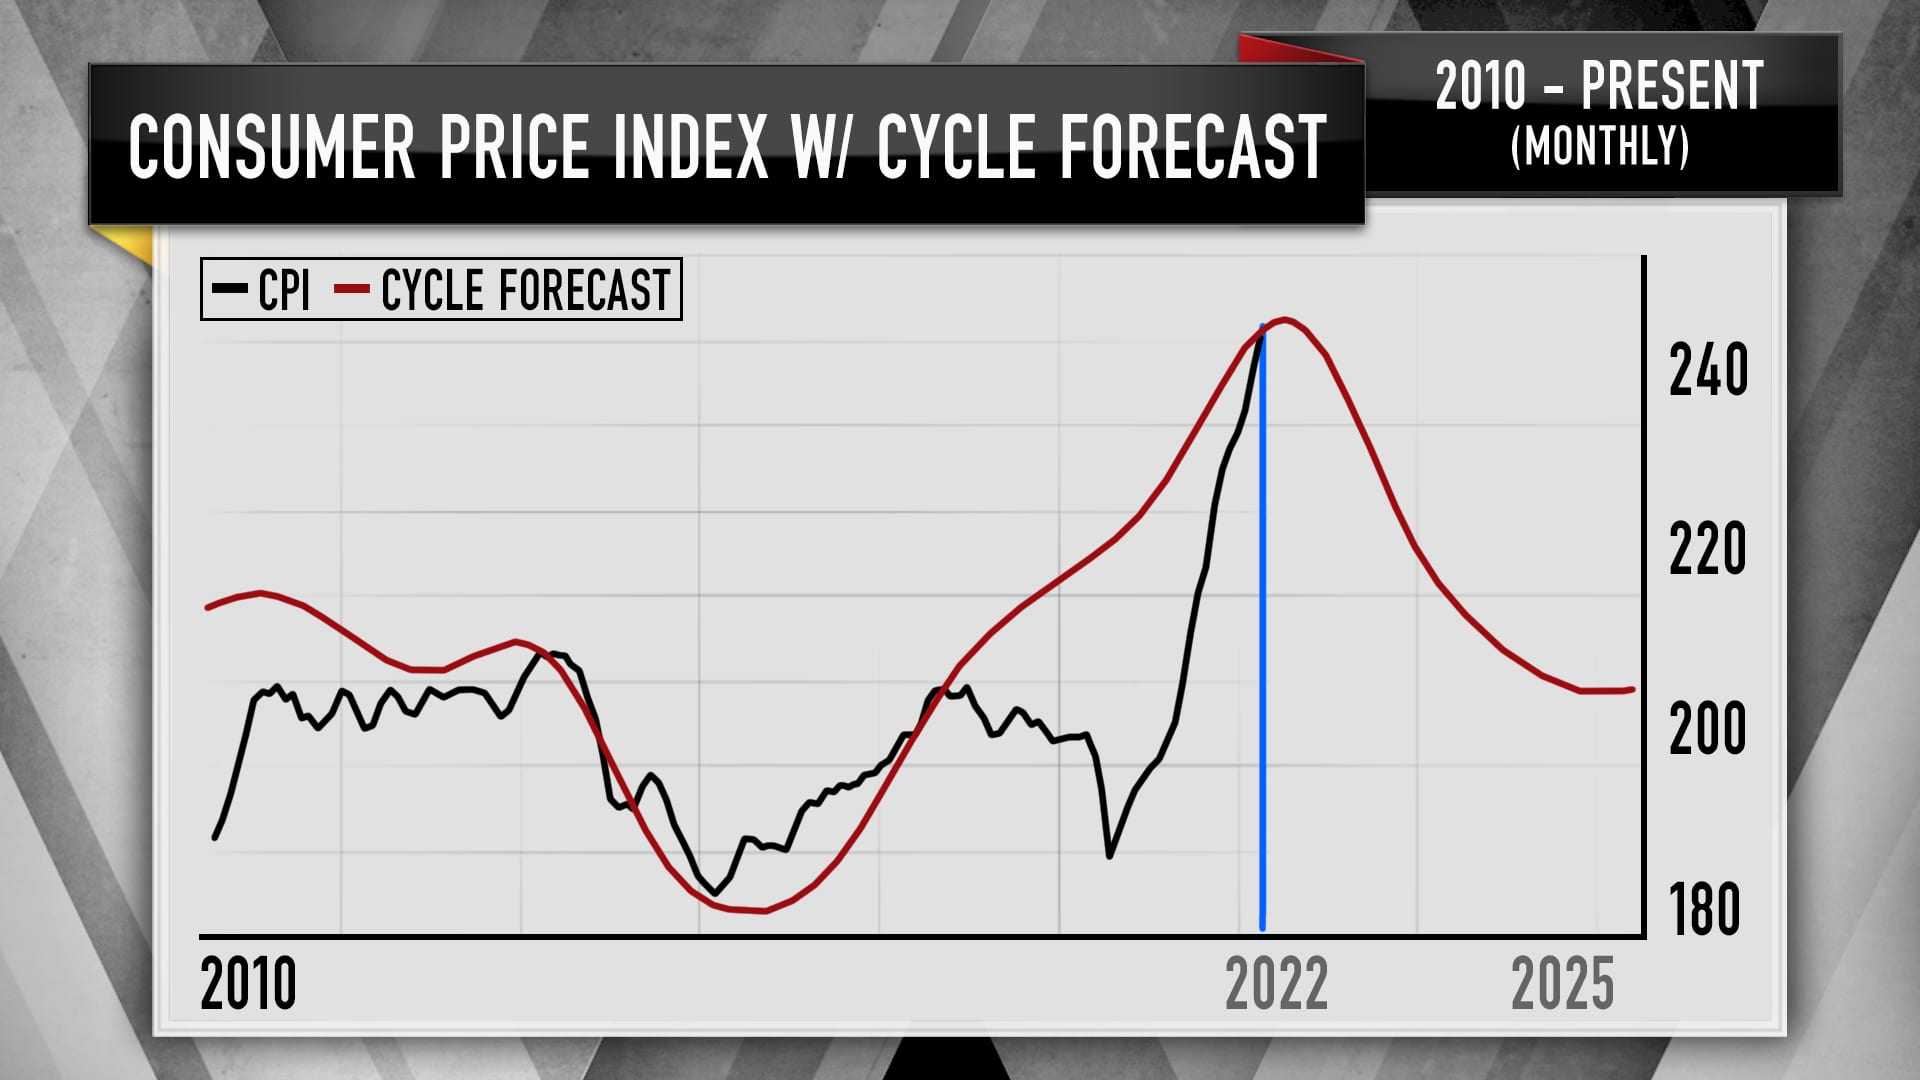 Technician Larry Williams' cycle forecast for the Consumer Price Index from 2010 to present.